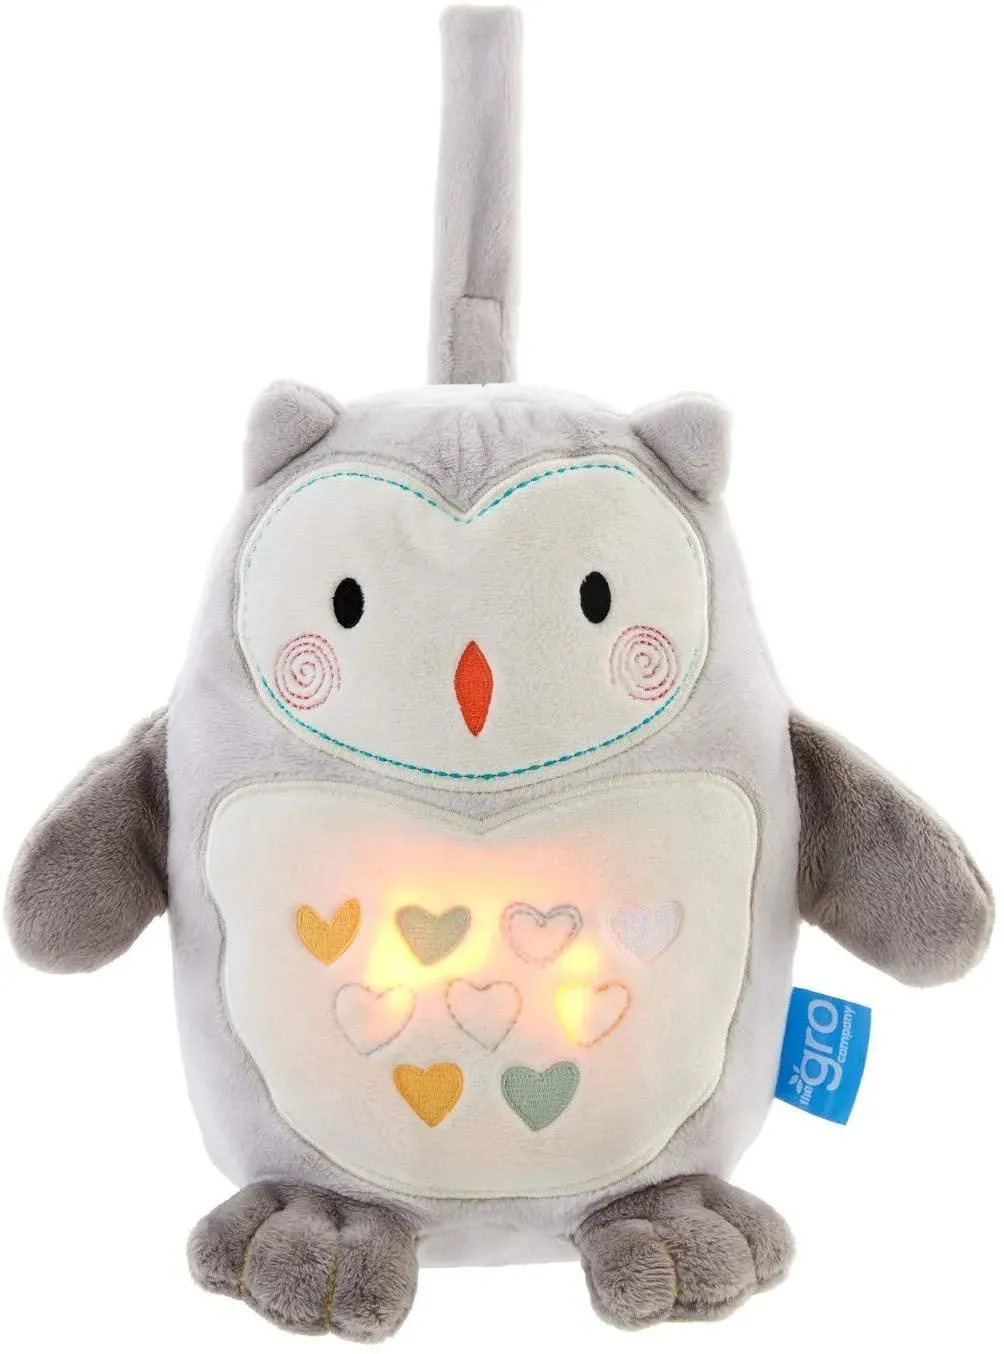 The Gro Company's Ollies the Owl Grofriend soft toy.